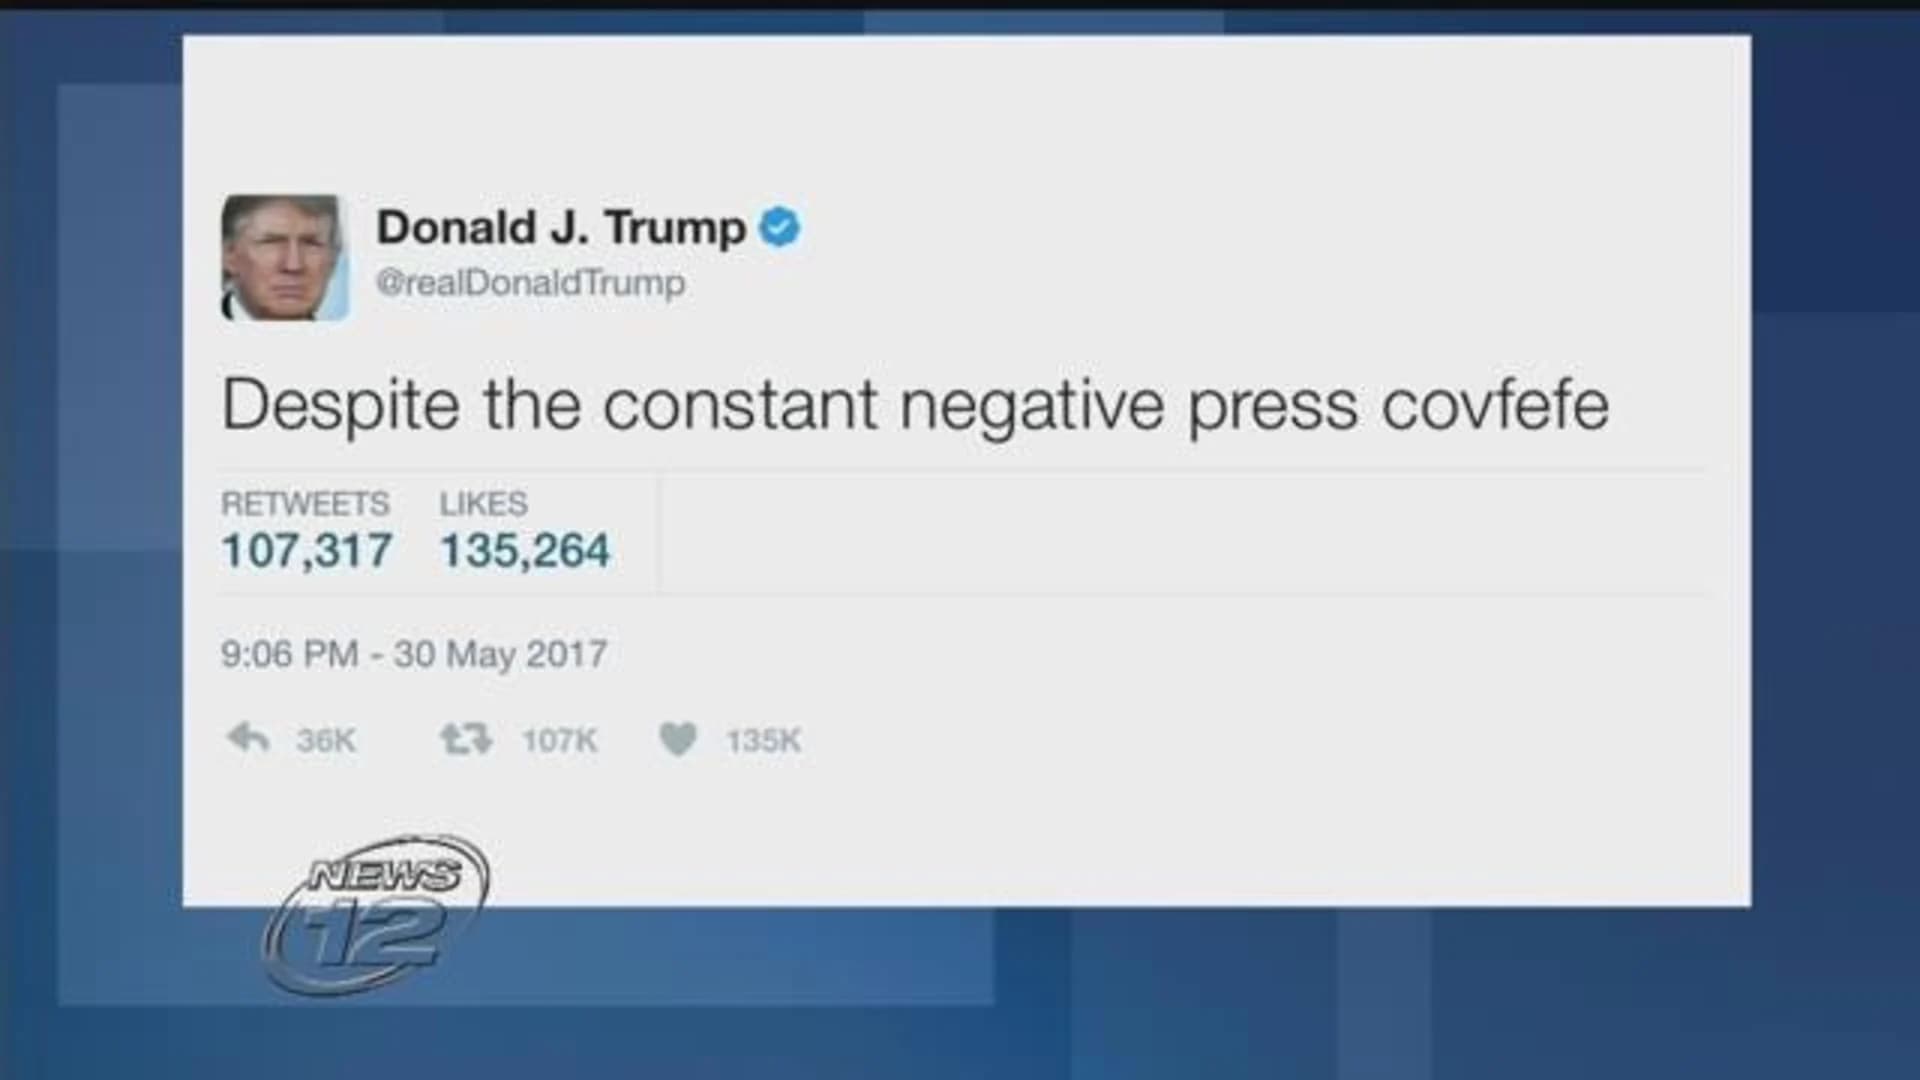 House 'covfefe' bill would save presidential tweets